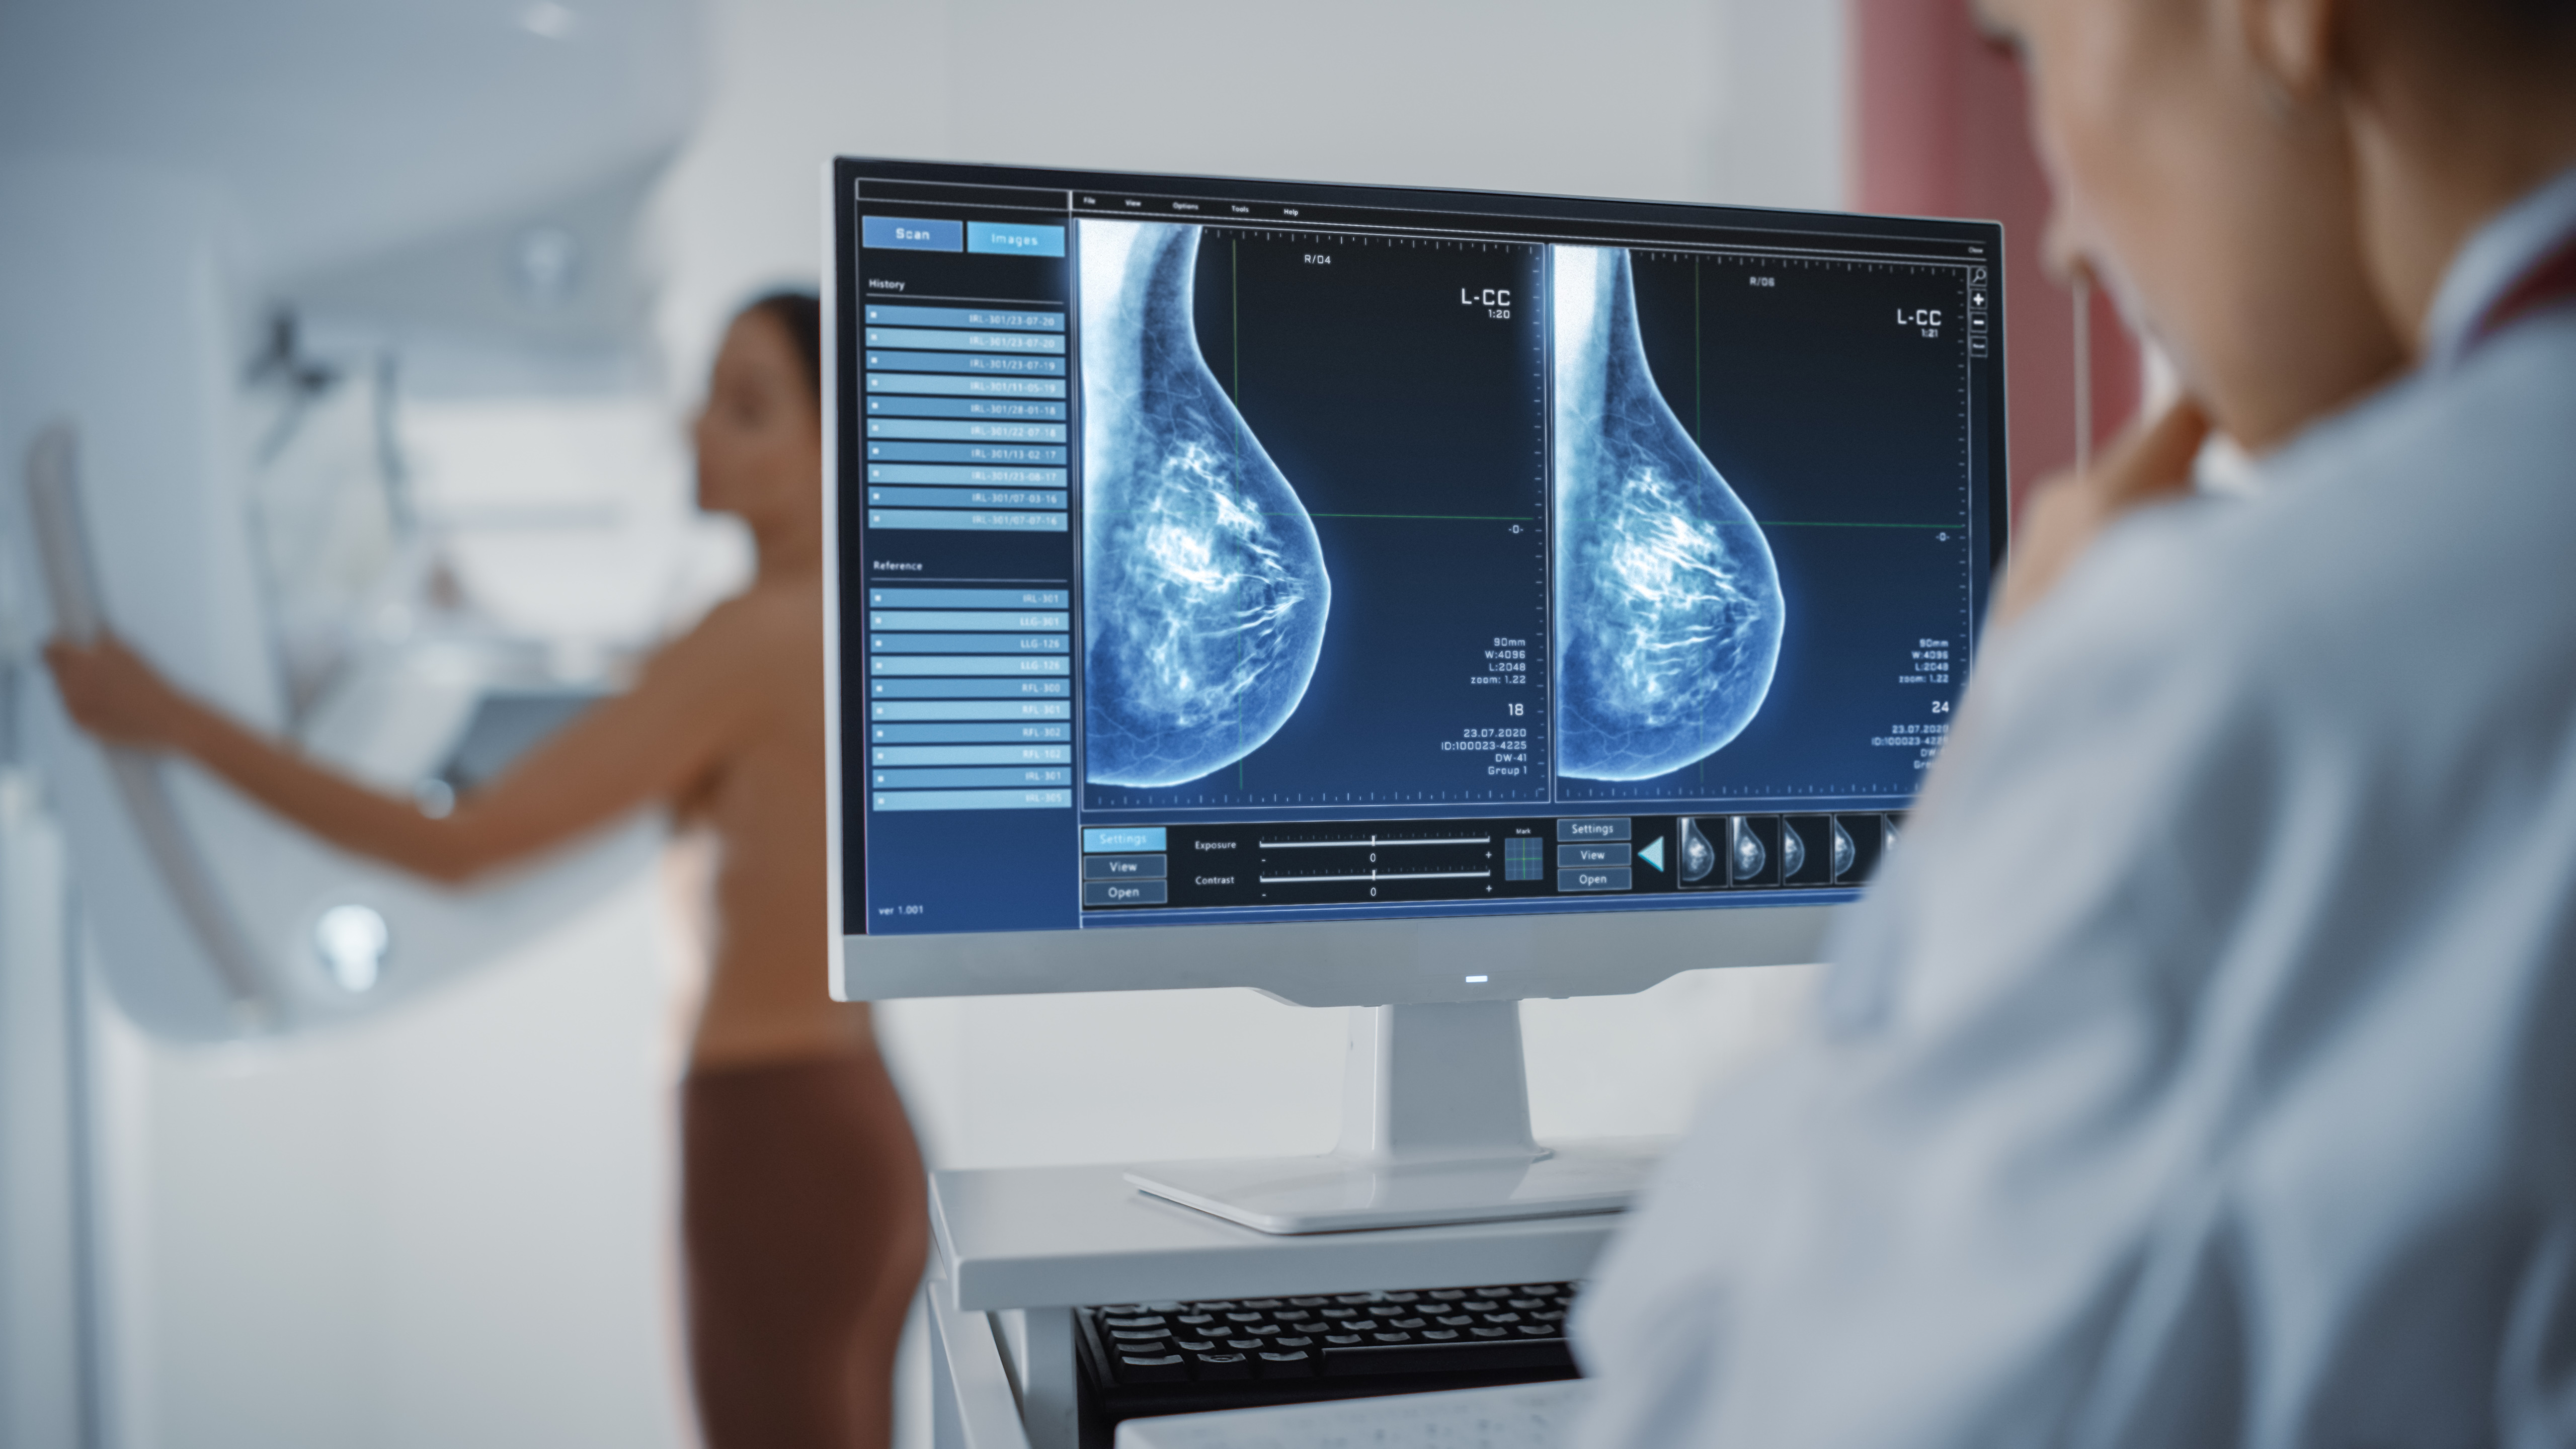 New Mammography Study Examines Association Between Breast Density Changes and Breast Cancer Risk